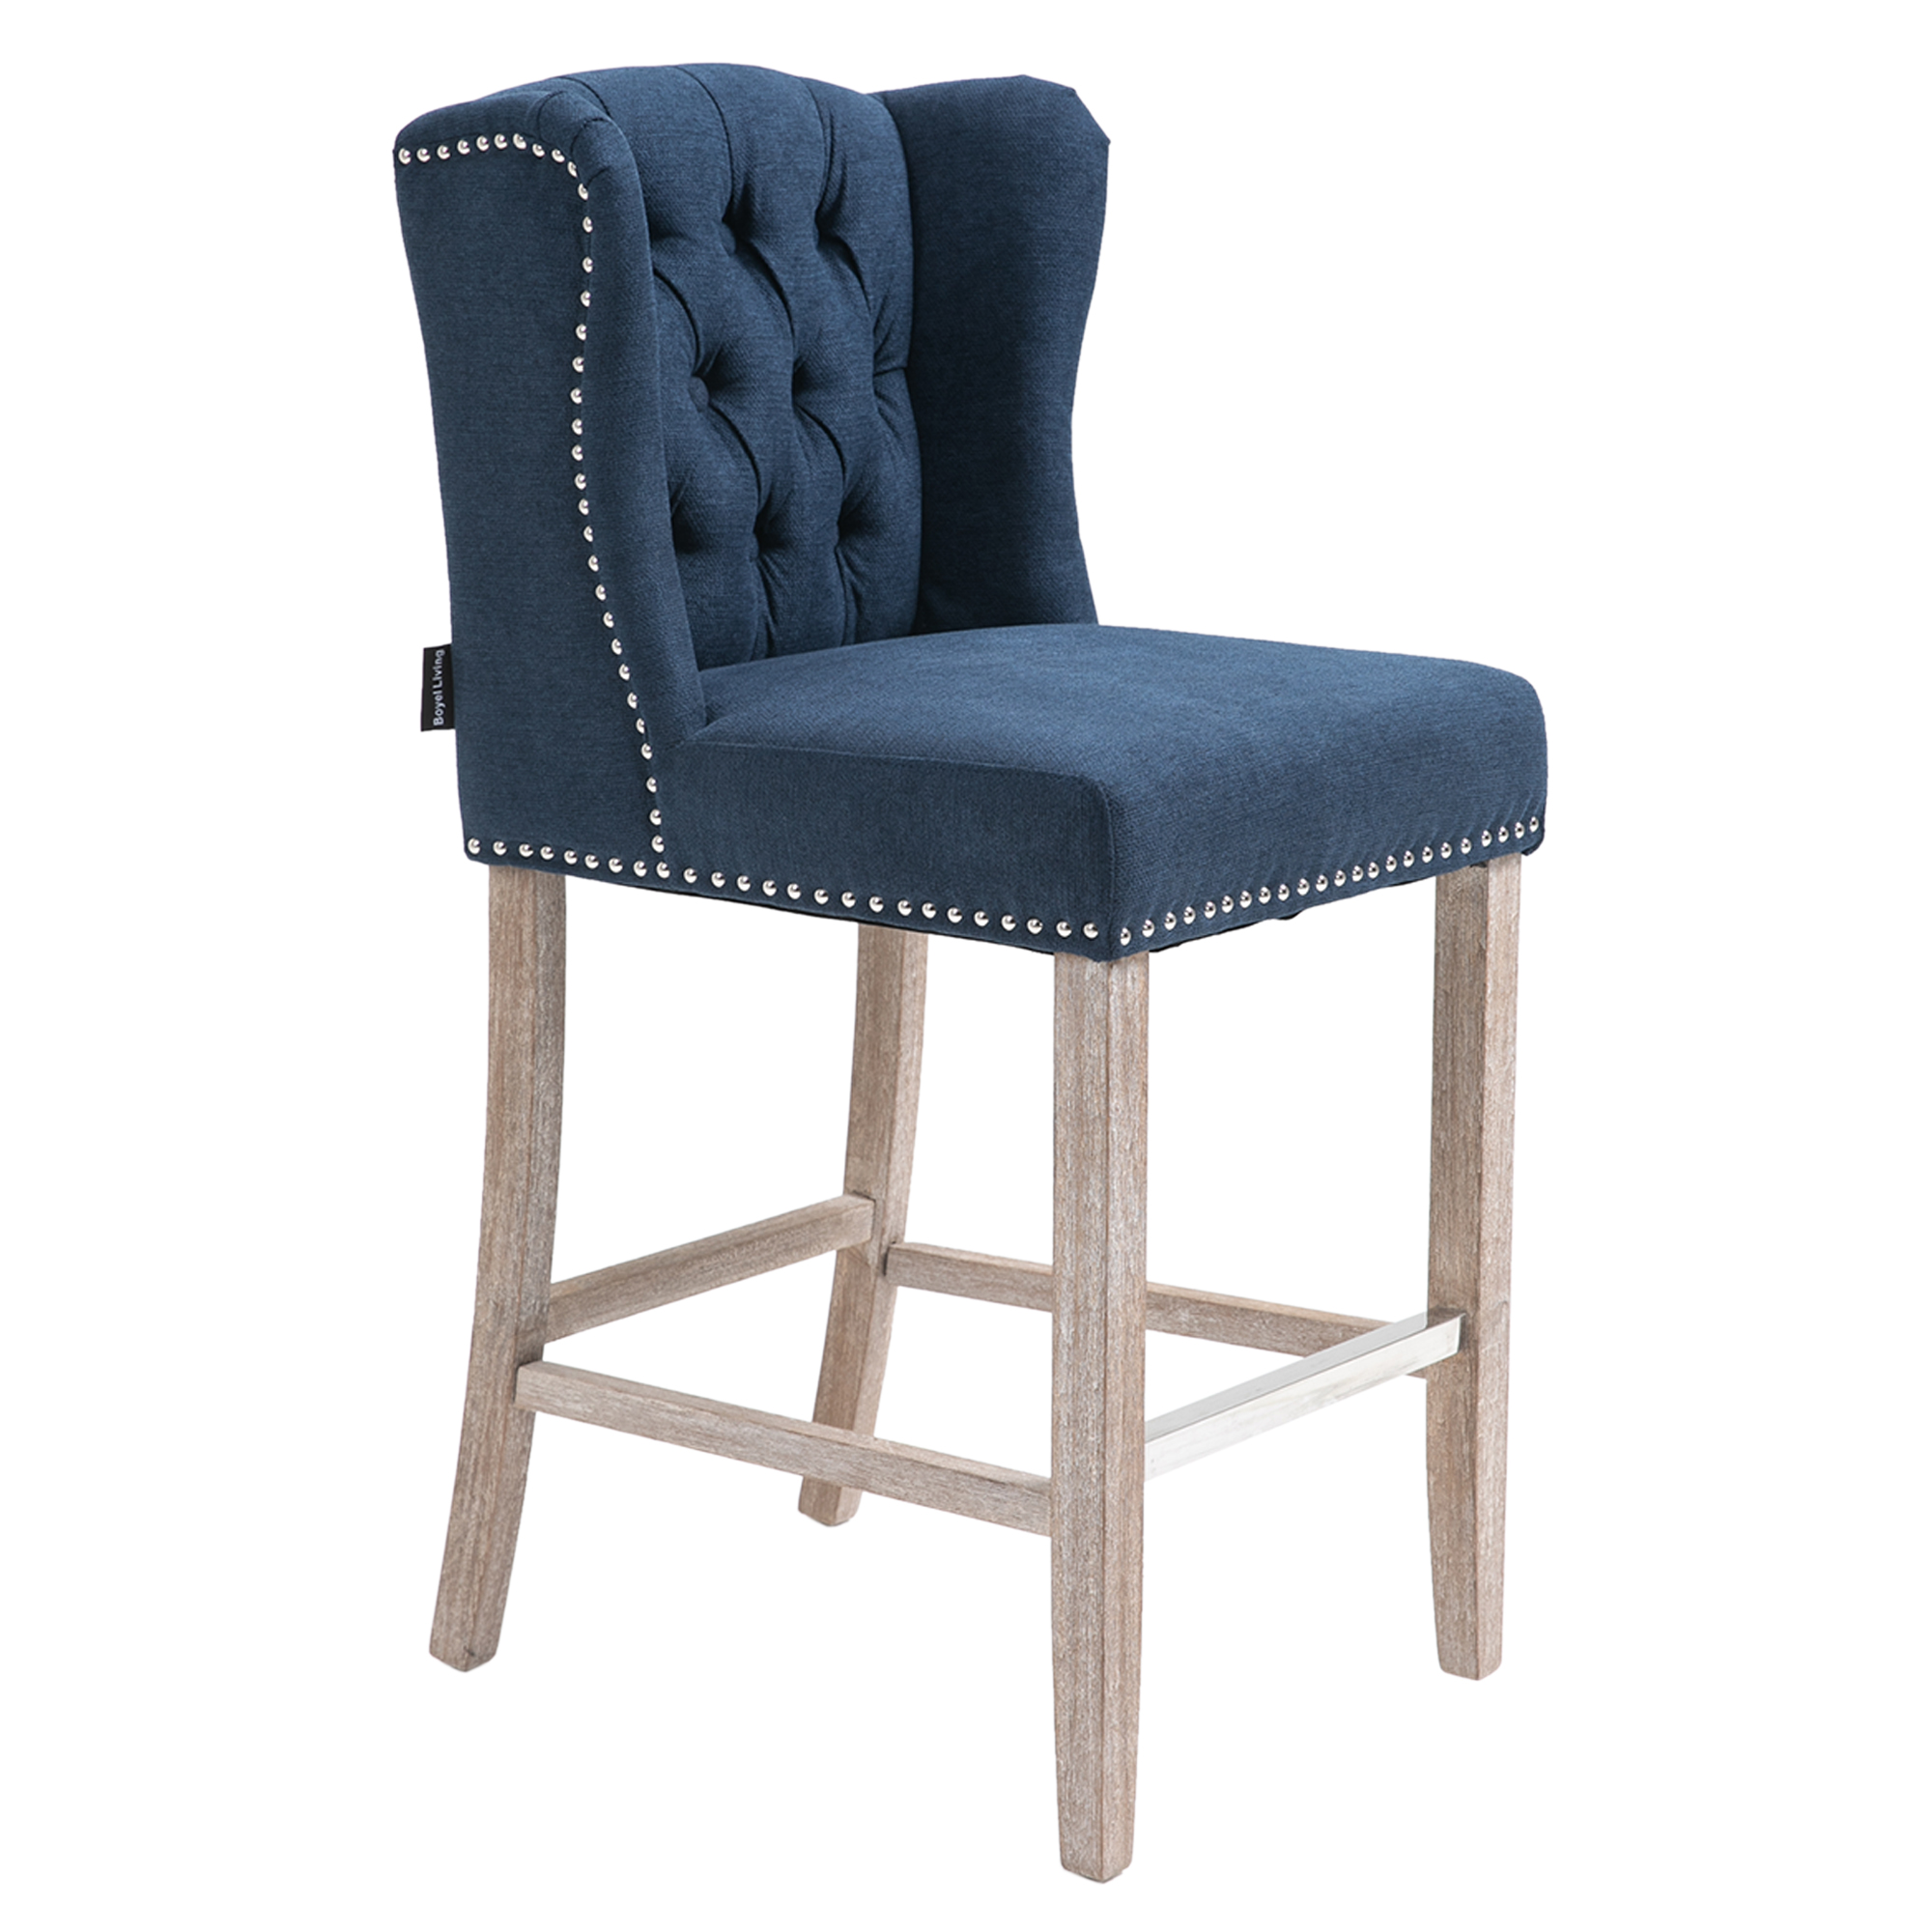 41 in. Classic Navy Blue Terry Fabric Nail-head Tufted Bar Stool with Sturdy Solid Wood Legs, Set of 2-CASAINC